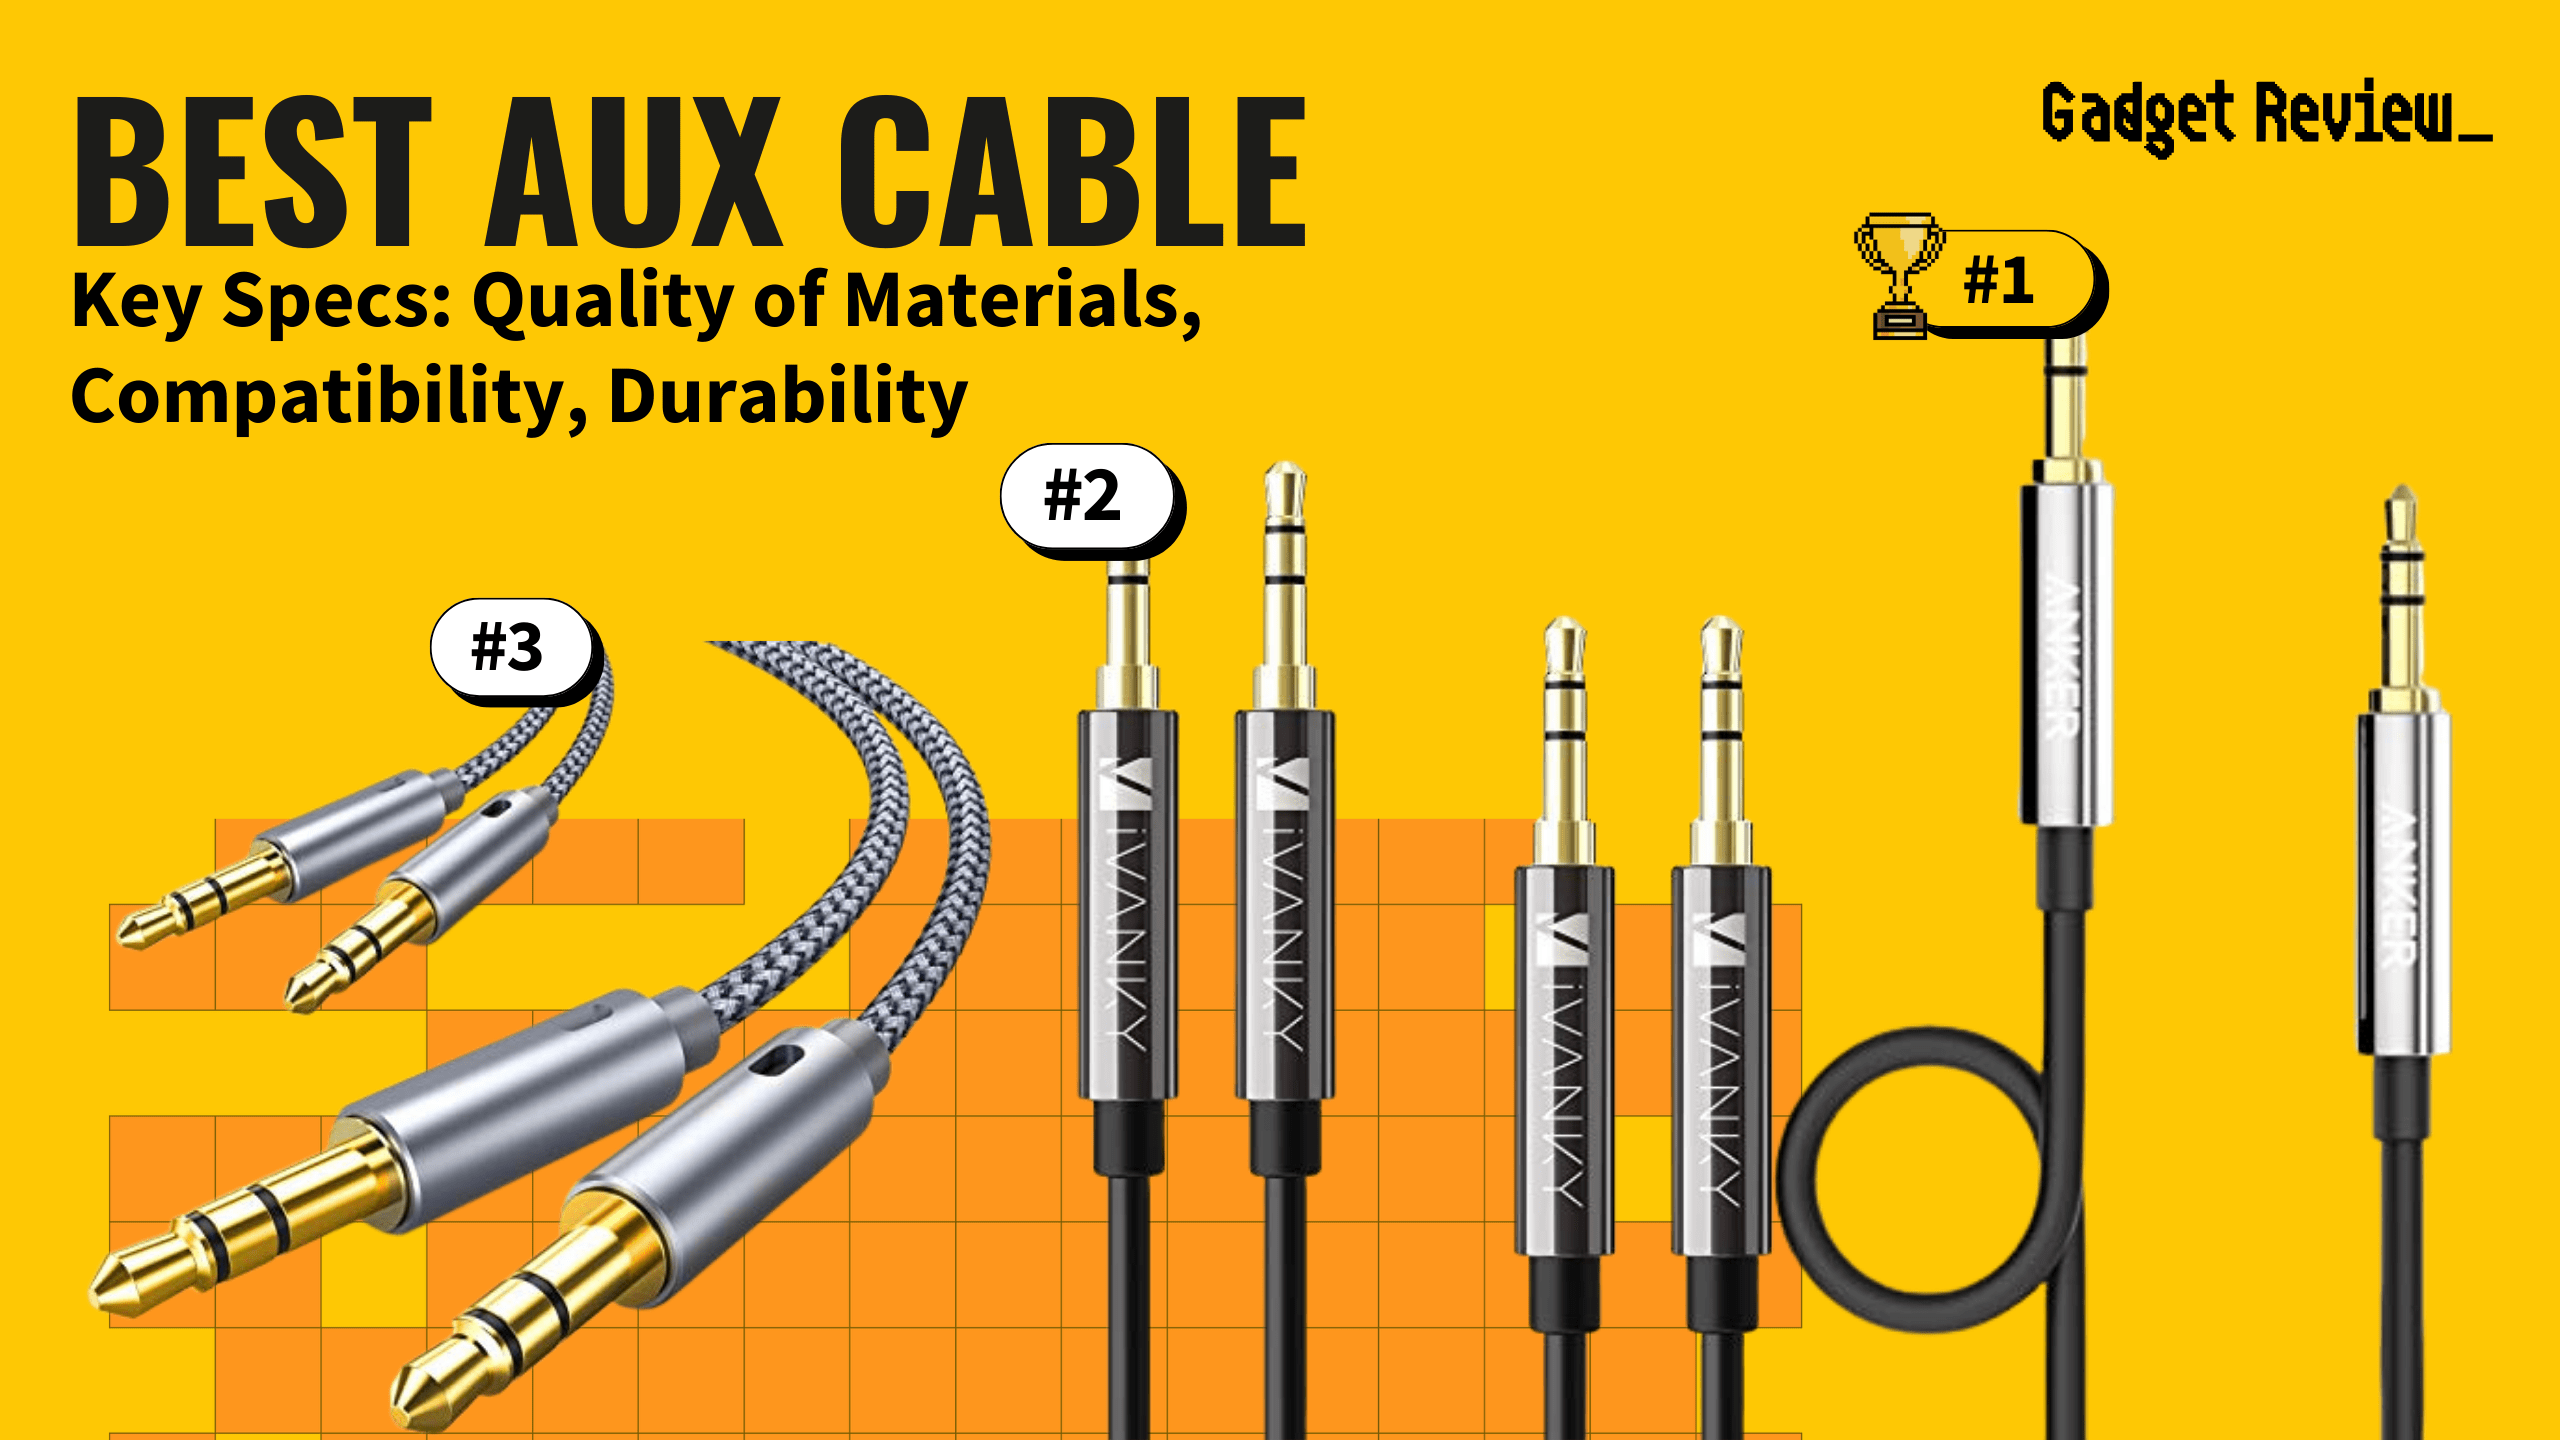 best aux cable featured image that shows the top three best speaker models